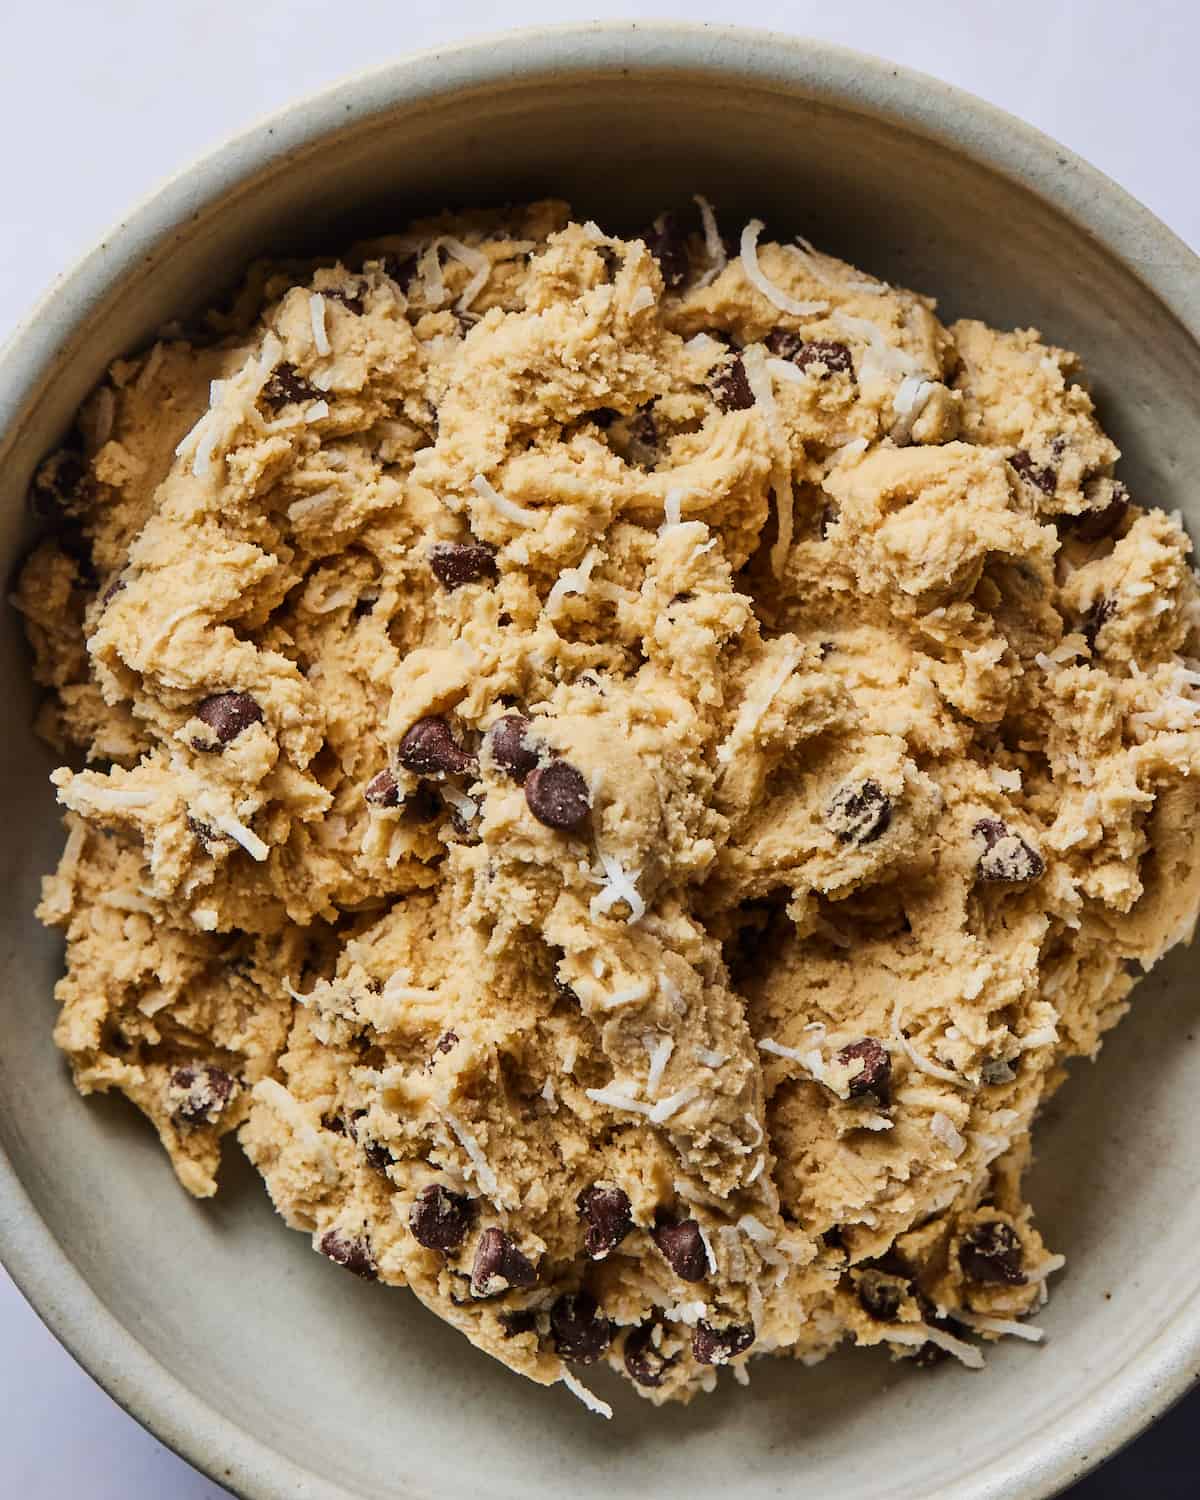 A close-up of a round ceramic bowl with Coconut Chocolate Chip Cookie dough.